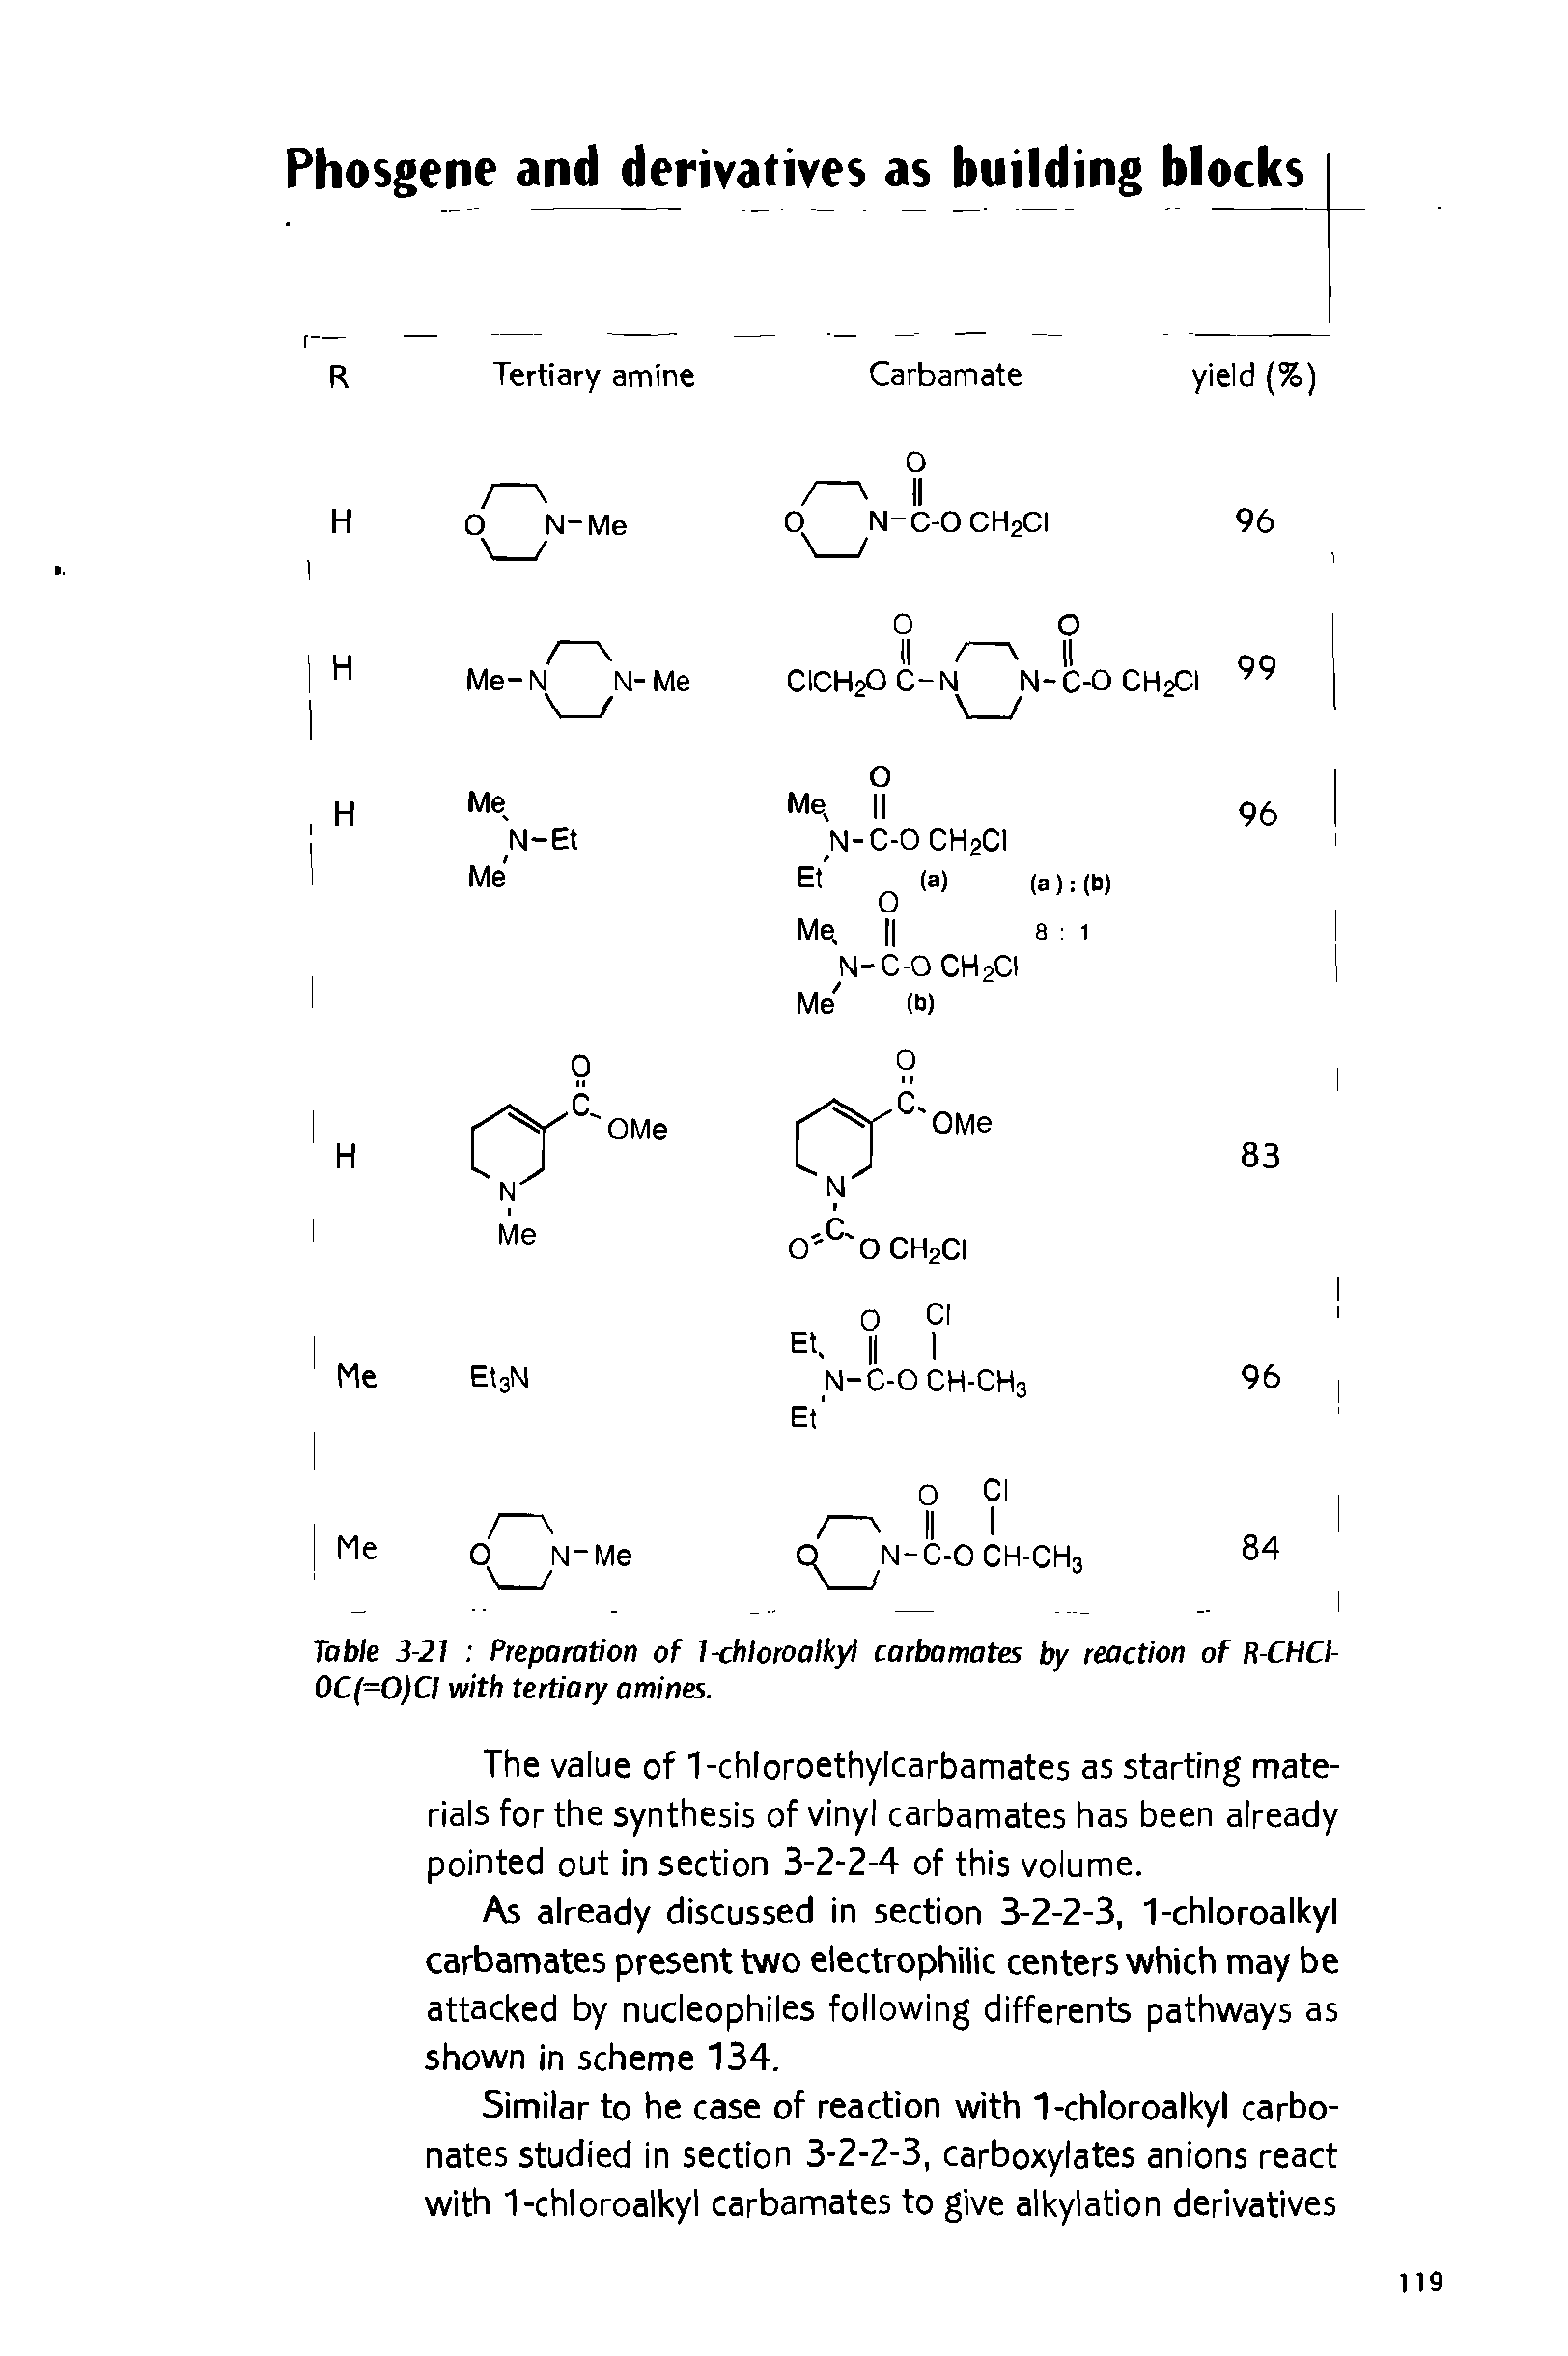 Table 3-21 Preparation of l-chloroalkyl carbamates by reaction of R-CHCI-0C(=O)CI with tertiary amines.